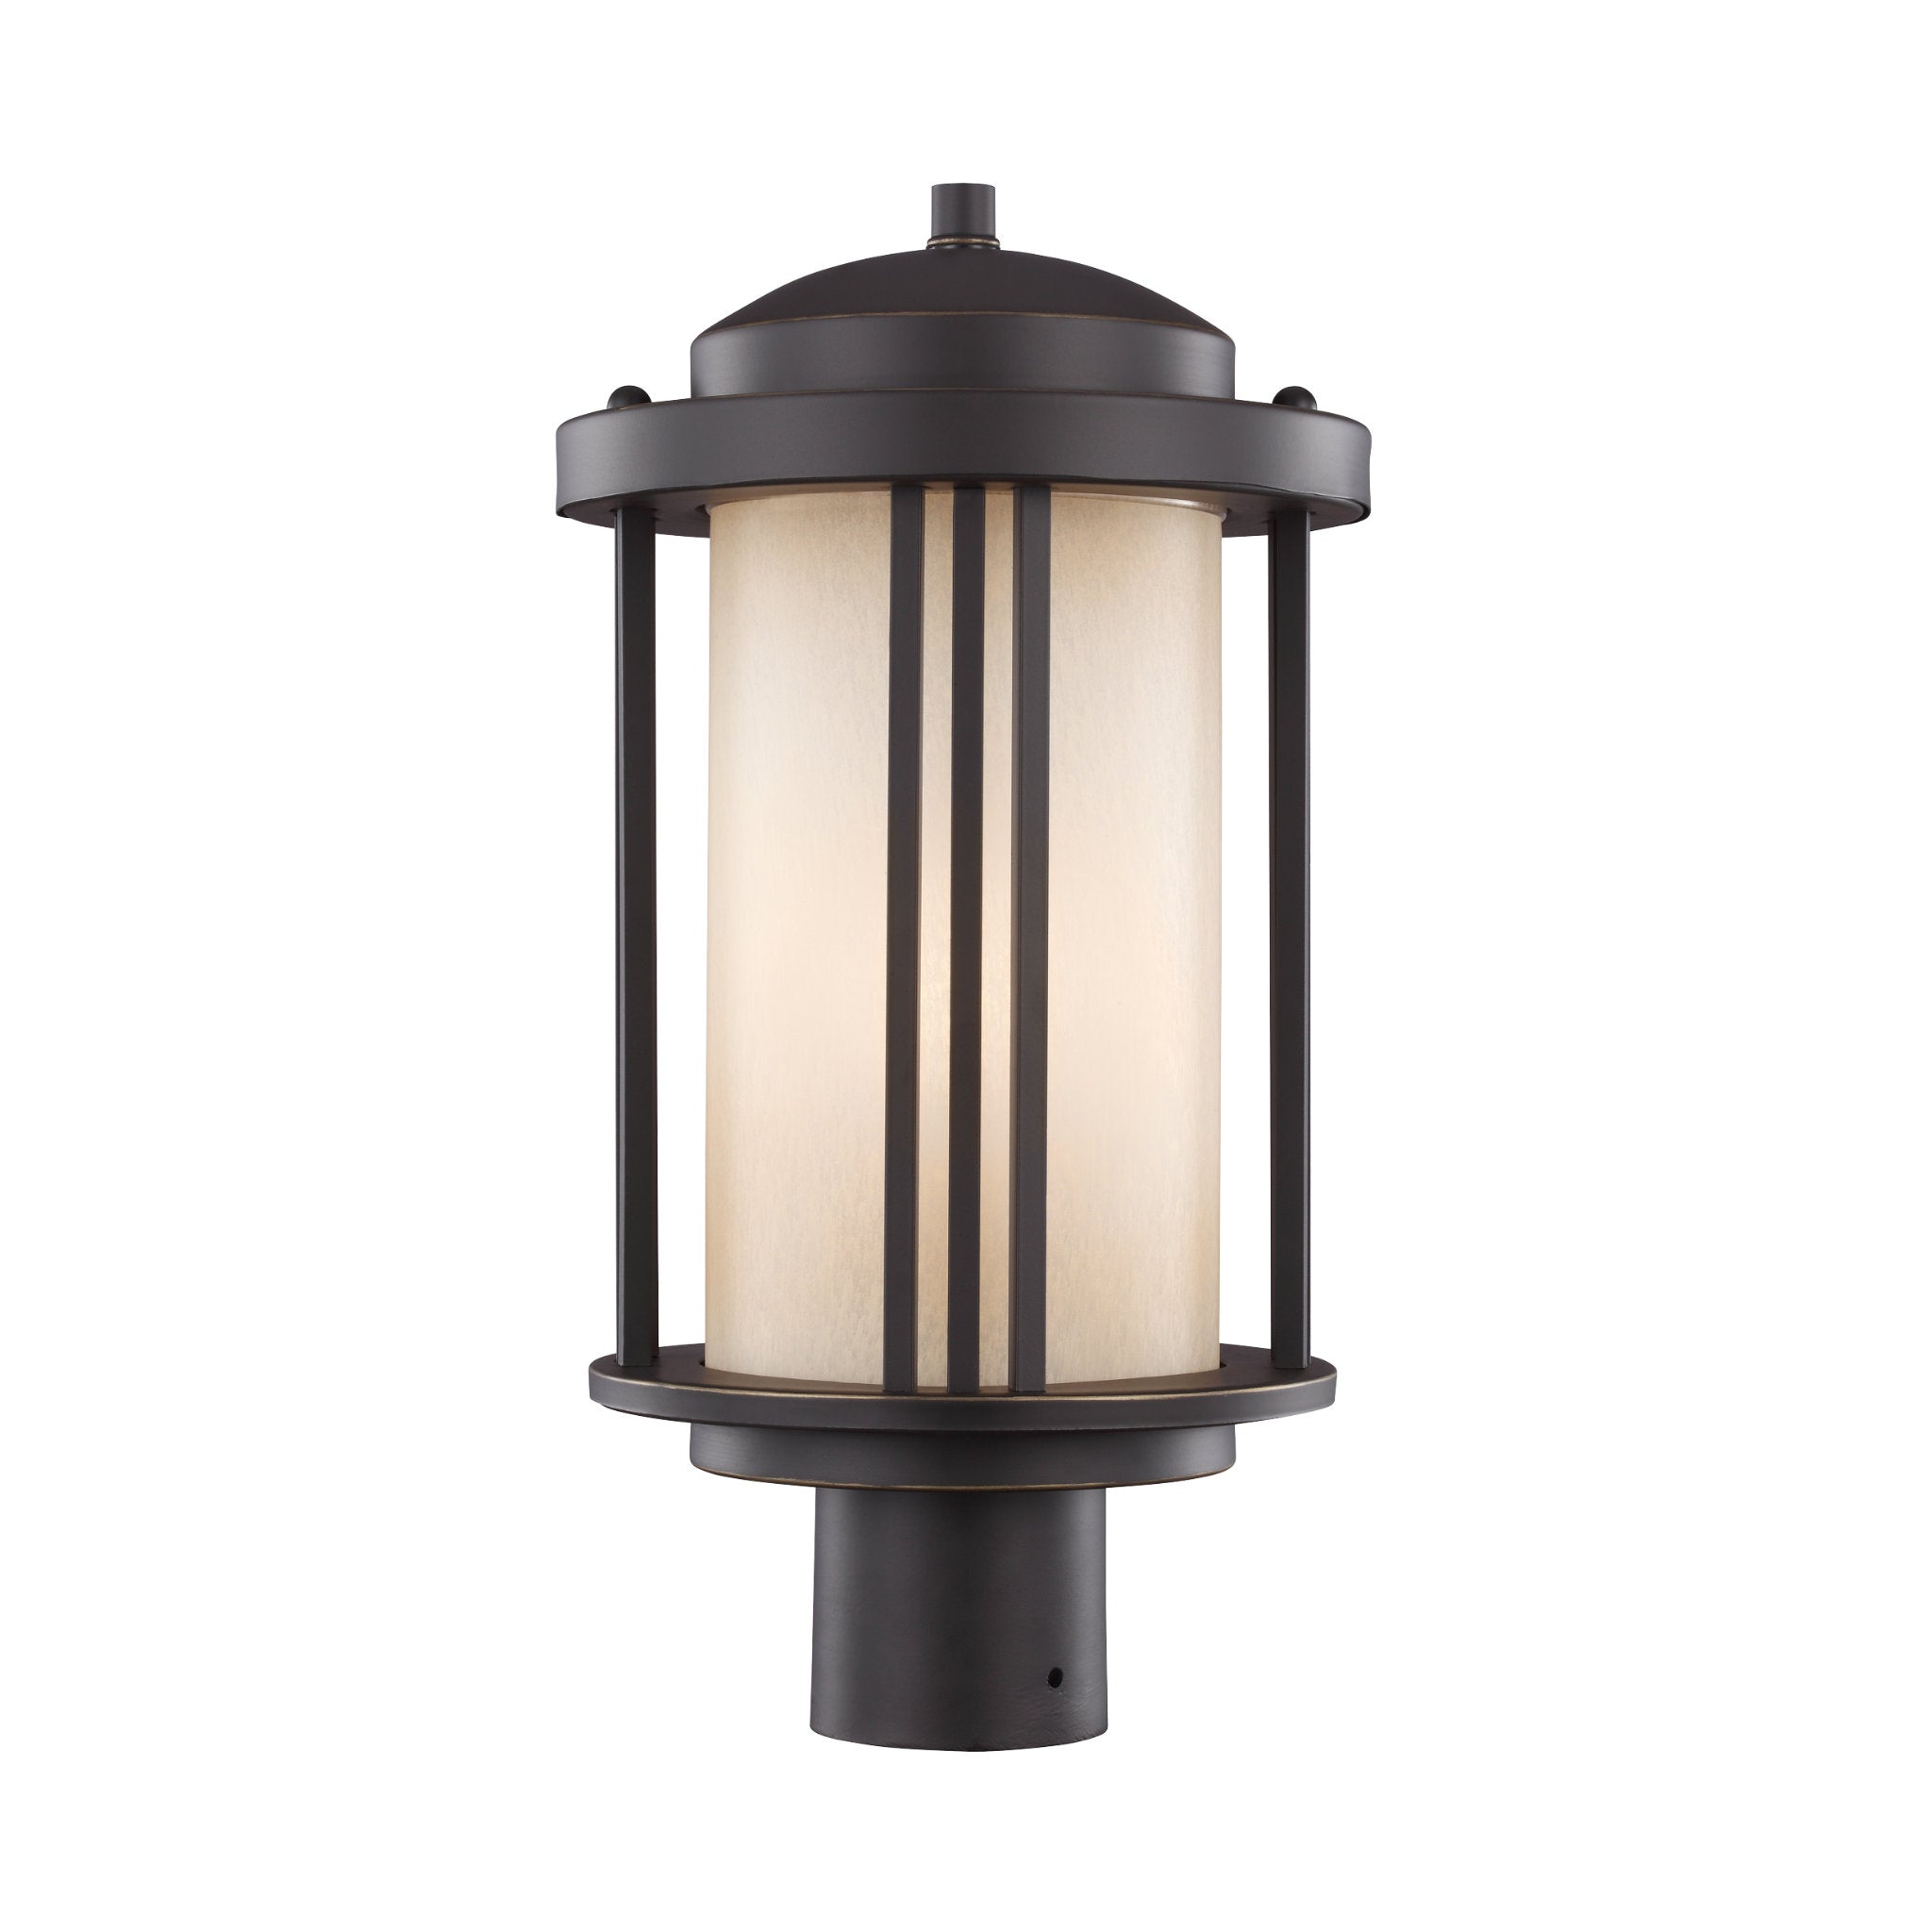 Crowell One Light Outdoor Post Lantern Contemporary Fixture 17" Height Aluminum Round Creme Parchment Shade in Antique Bronze